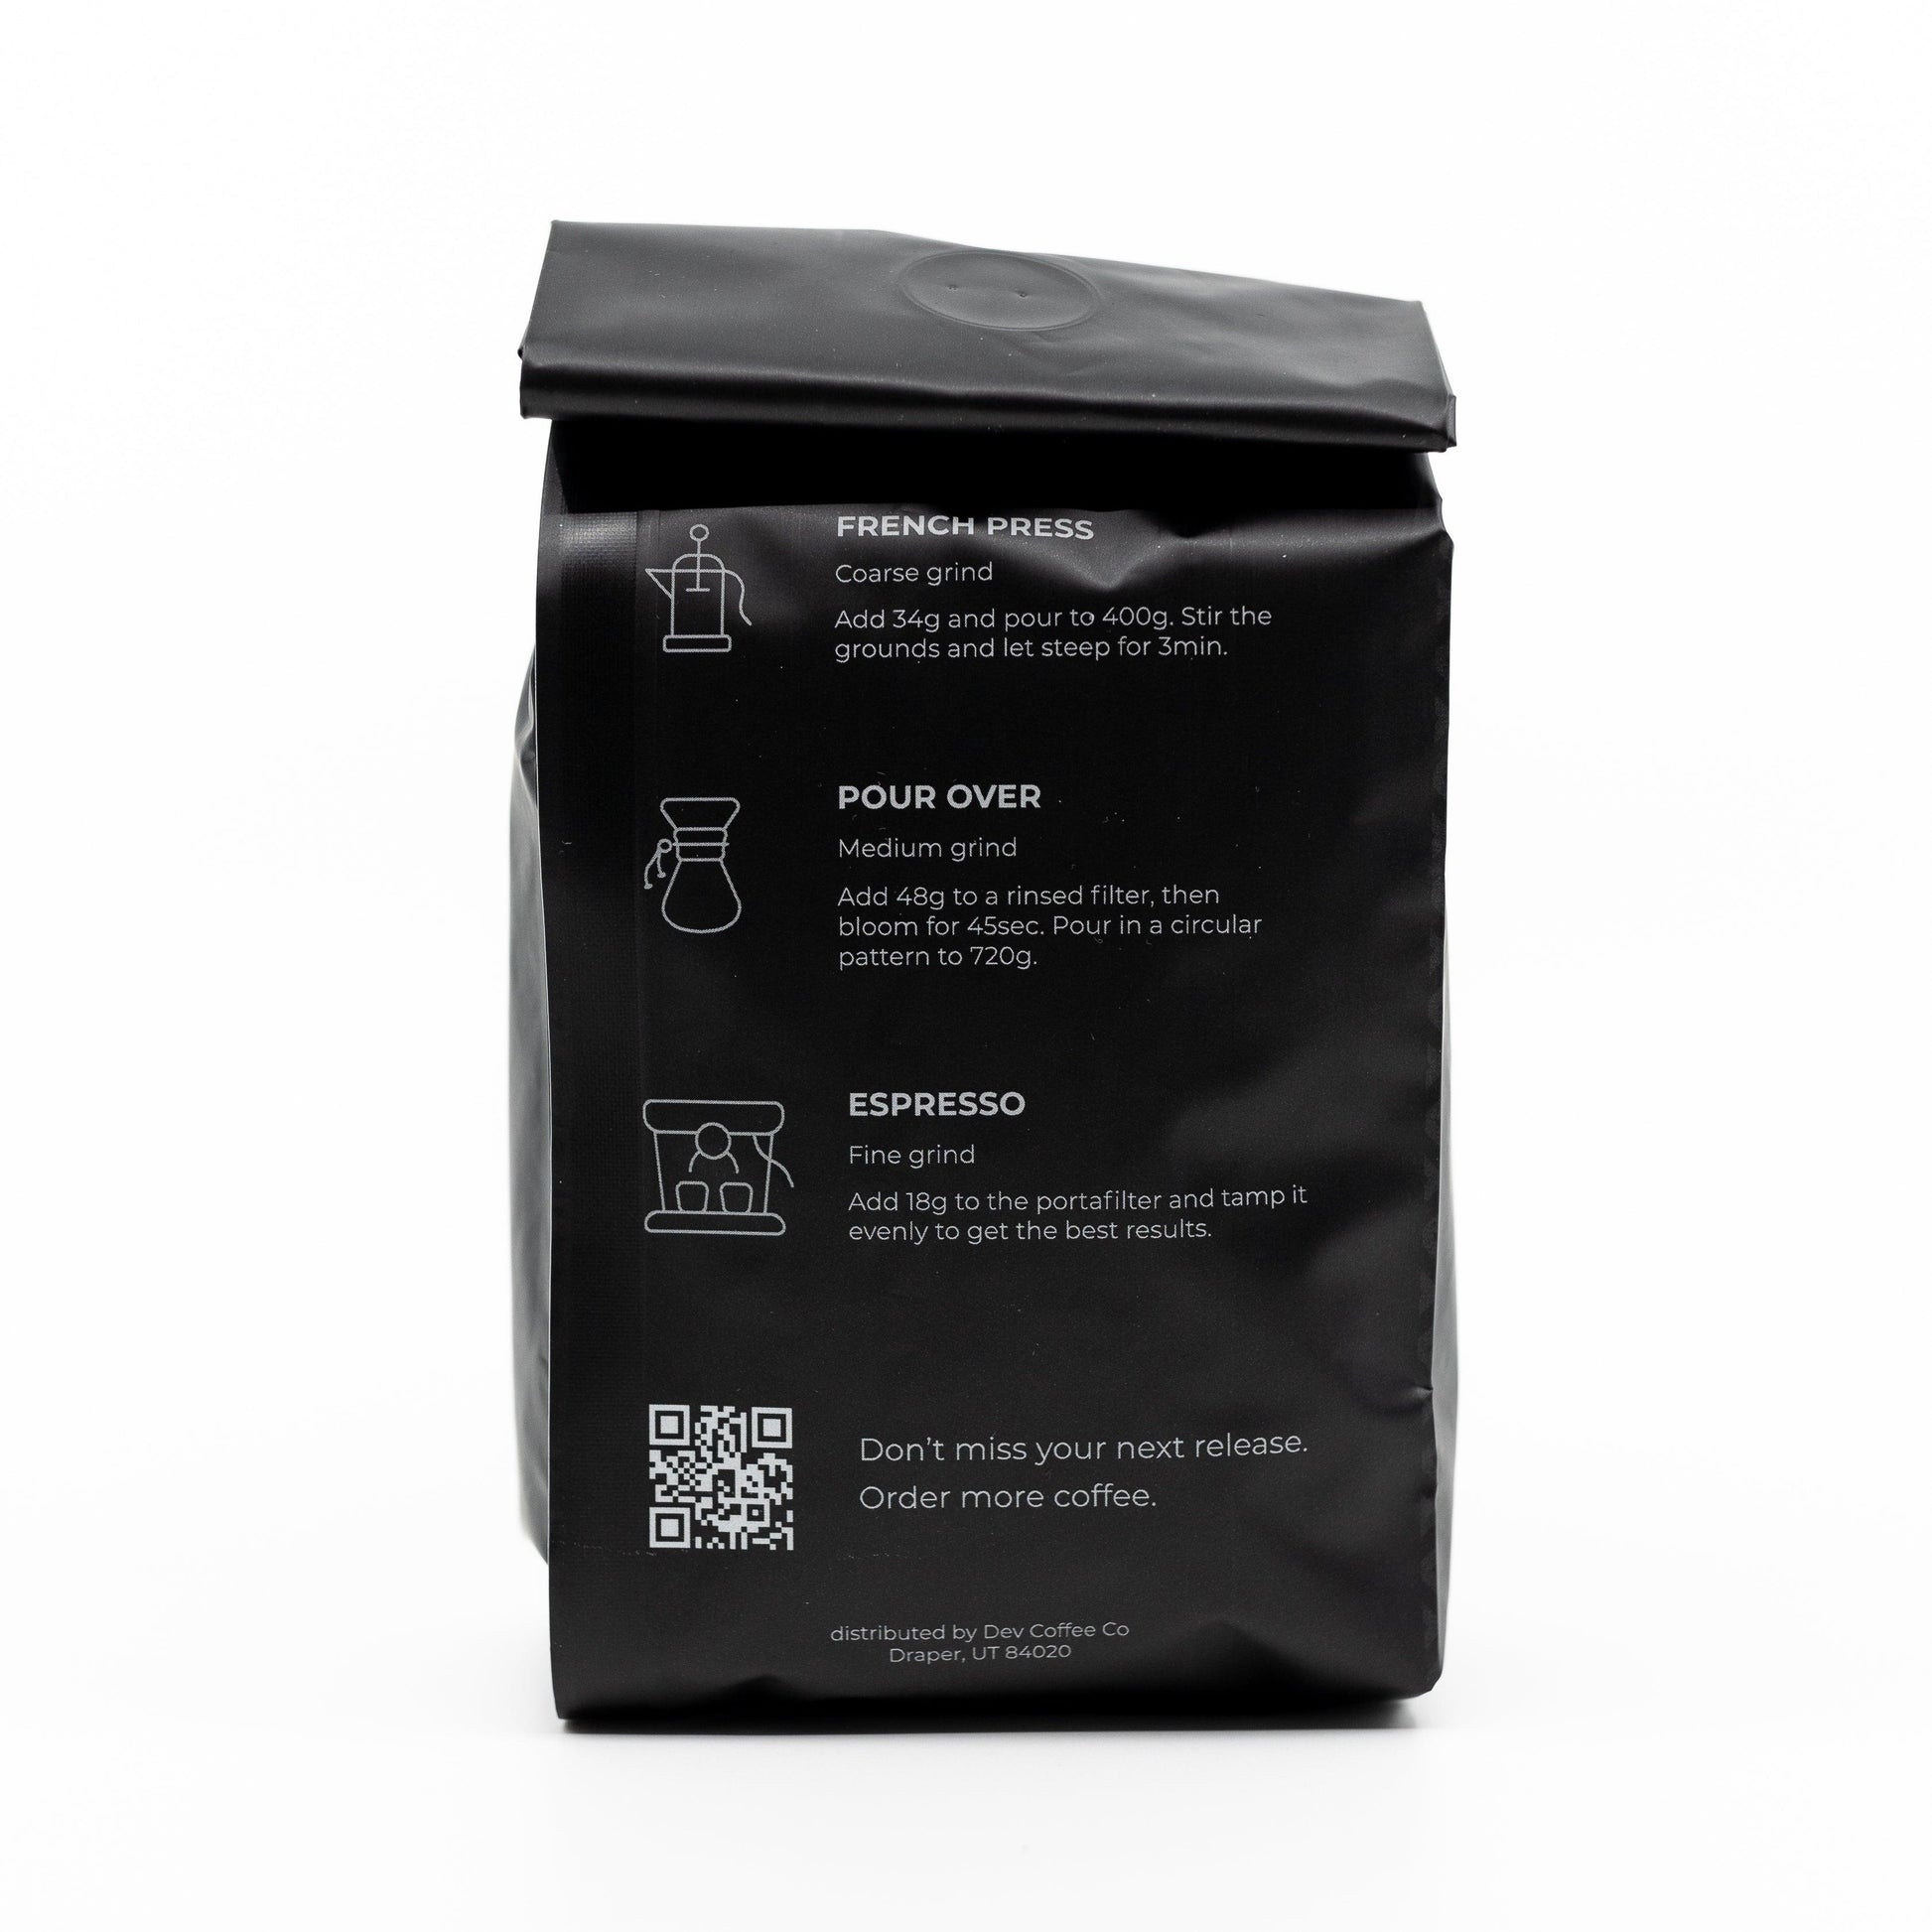 Back of coffee bag with coffee preparation instructions. "Dark mode" from Dev Coffee Co.